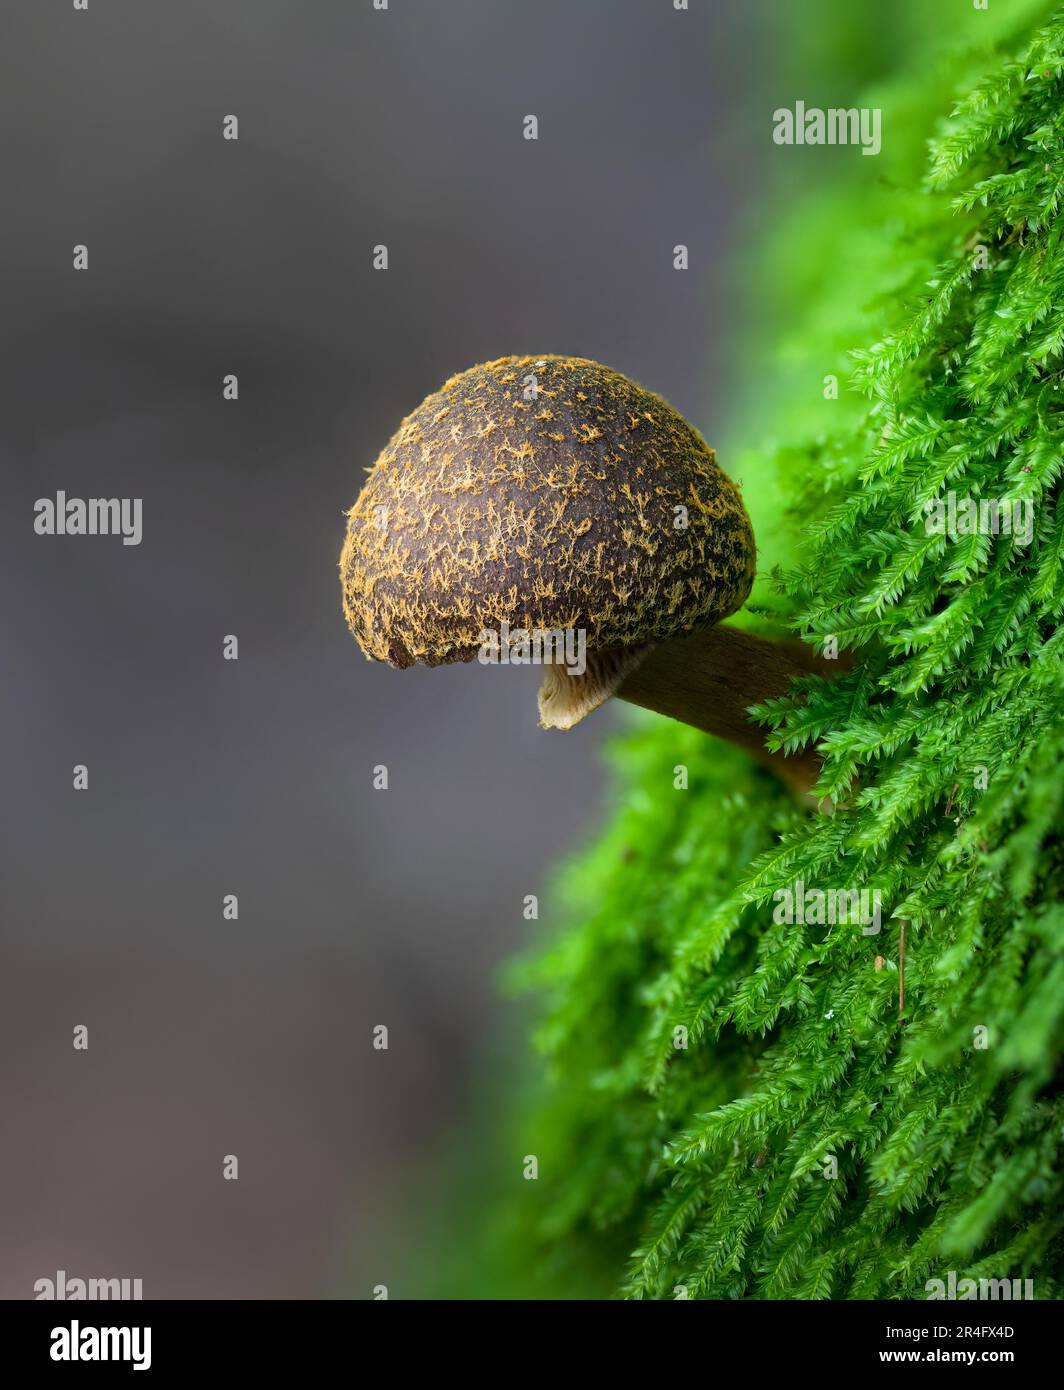 Descolea recedens, a small brown fungus growing among moss in forest. Auckland. Vertical format. Stock Photo